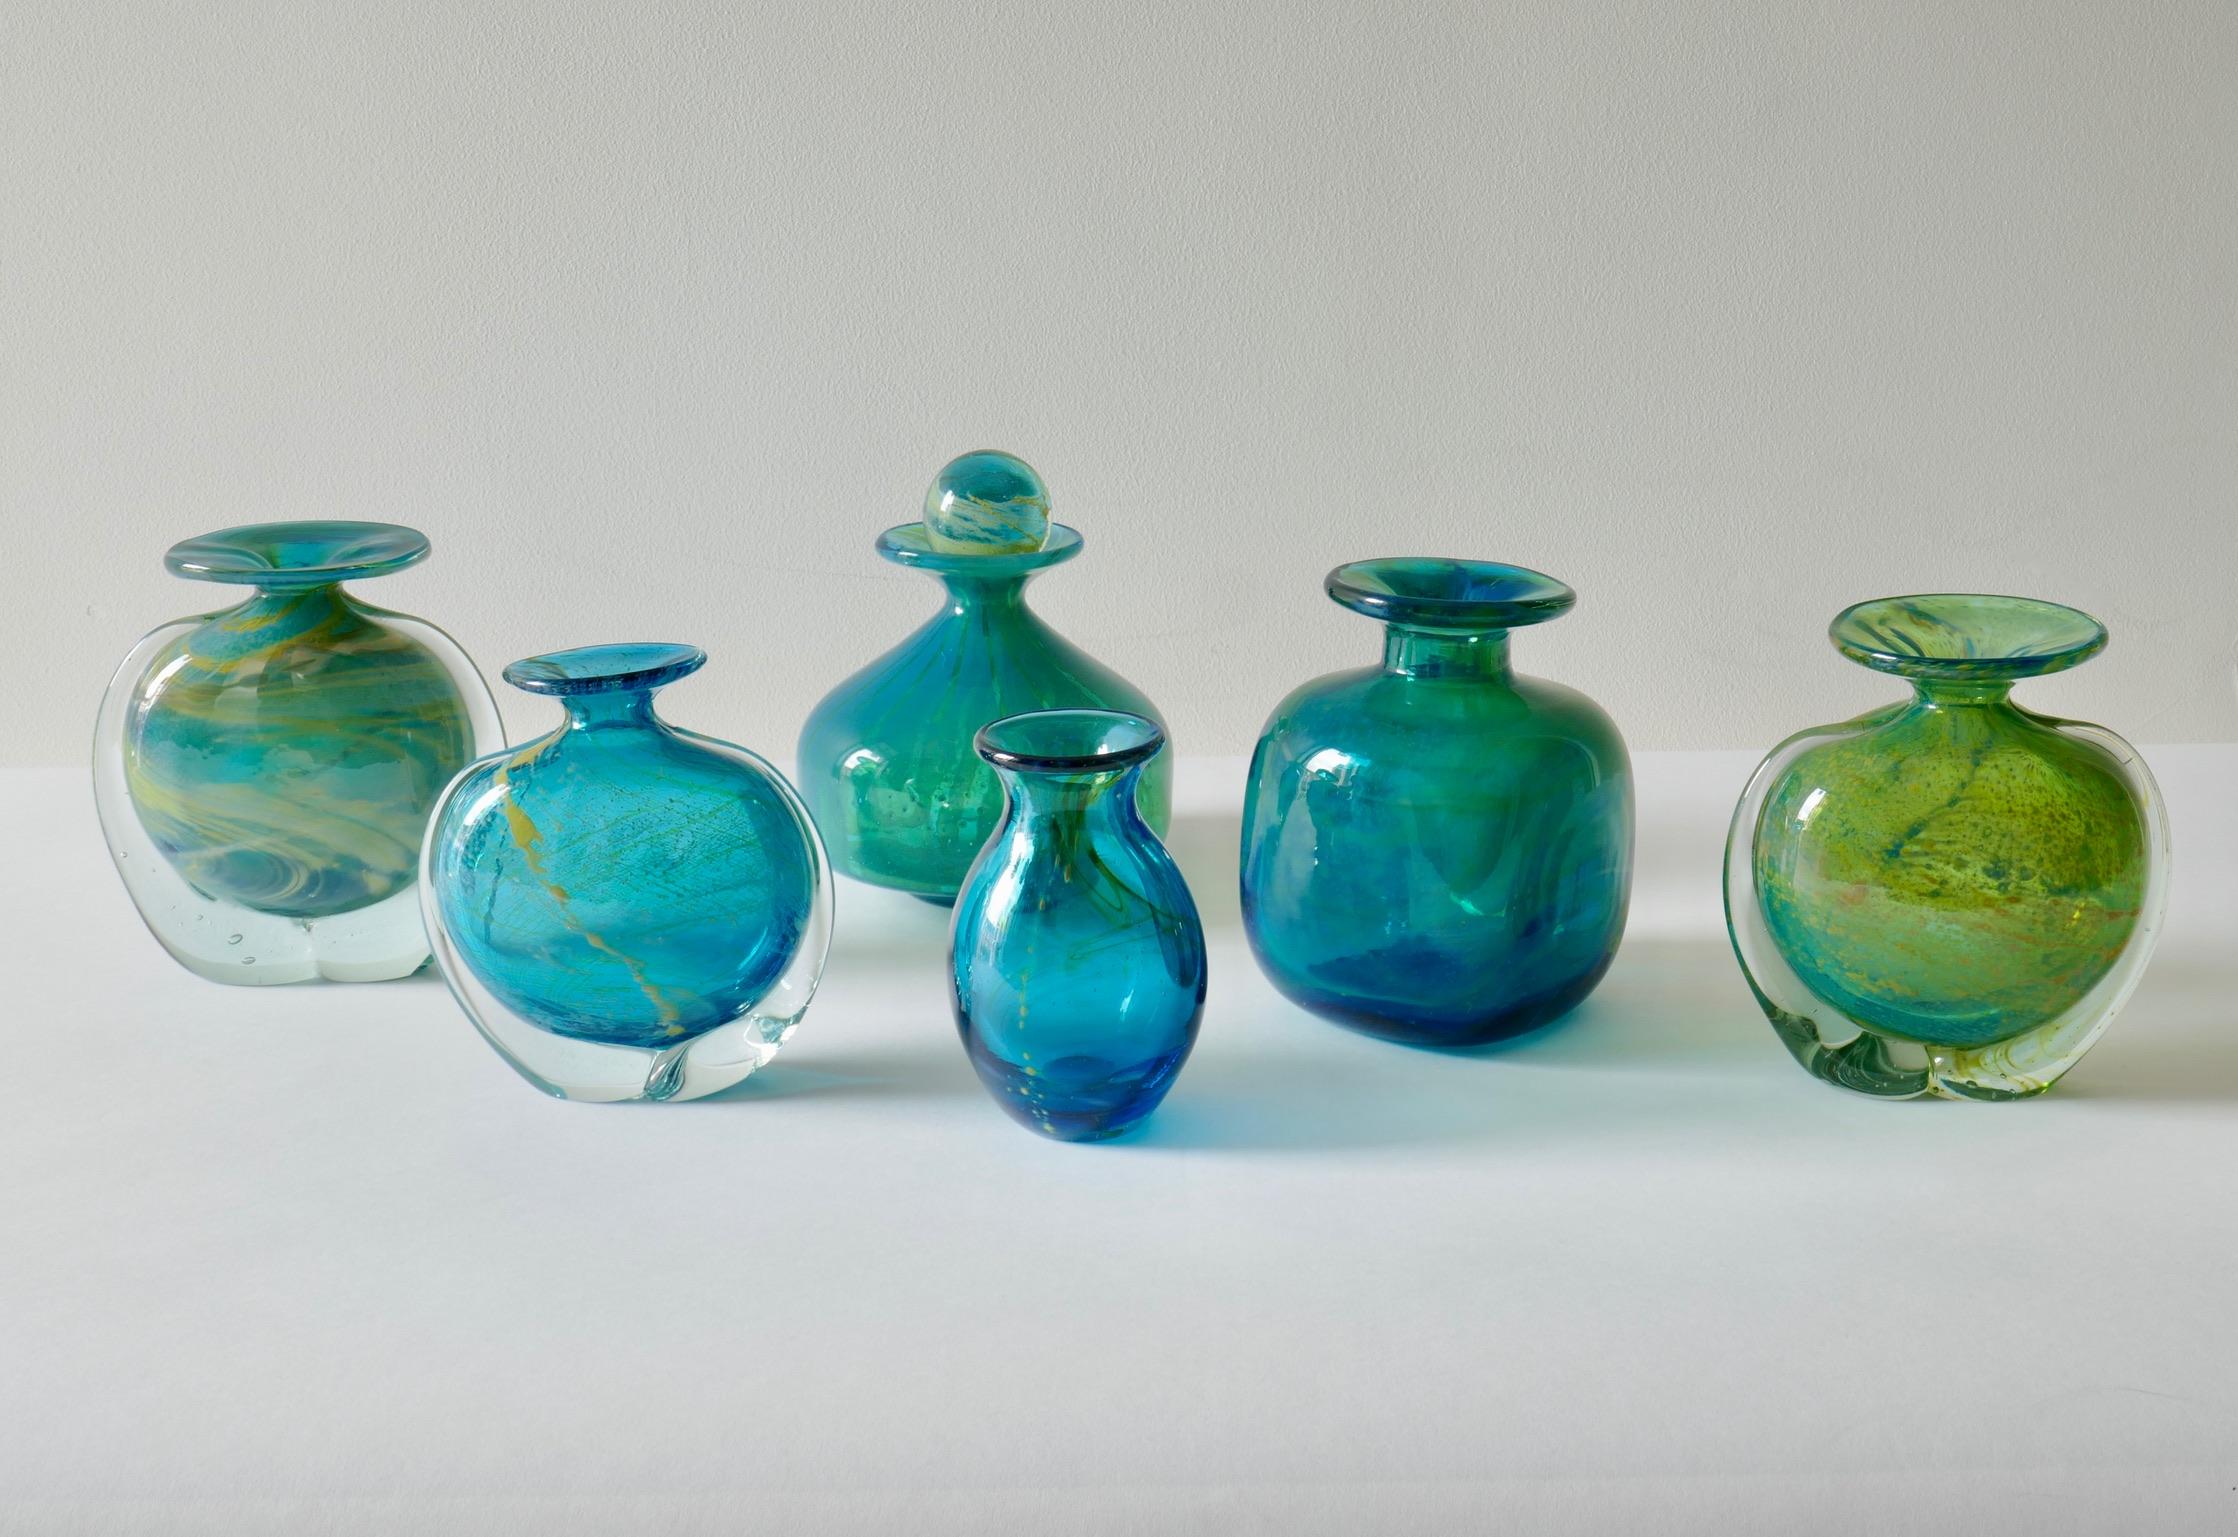 Maltese Set of 6 Mdina Turquoise Blue and Green Glass Vases, 1960s